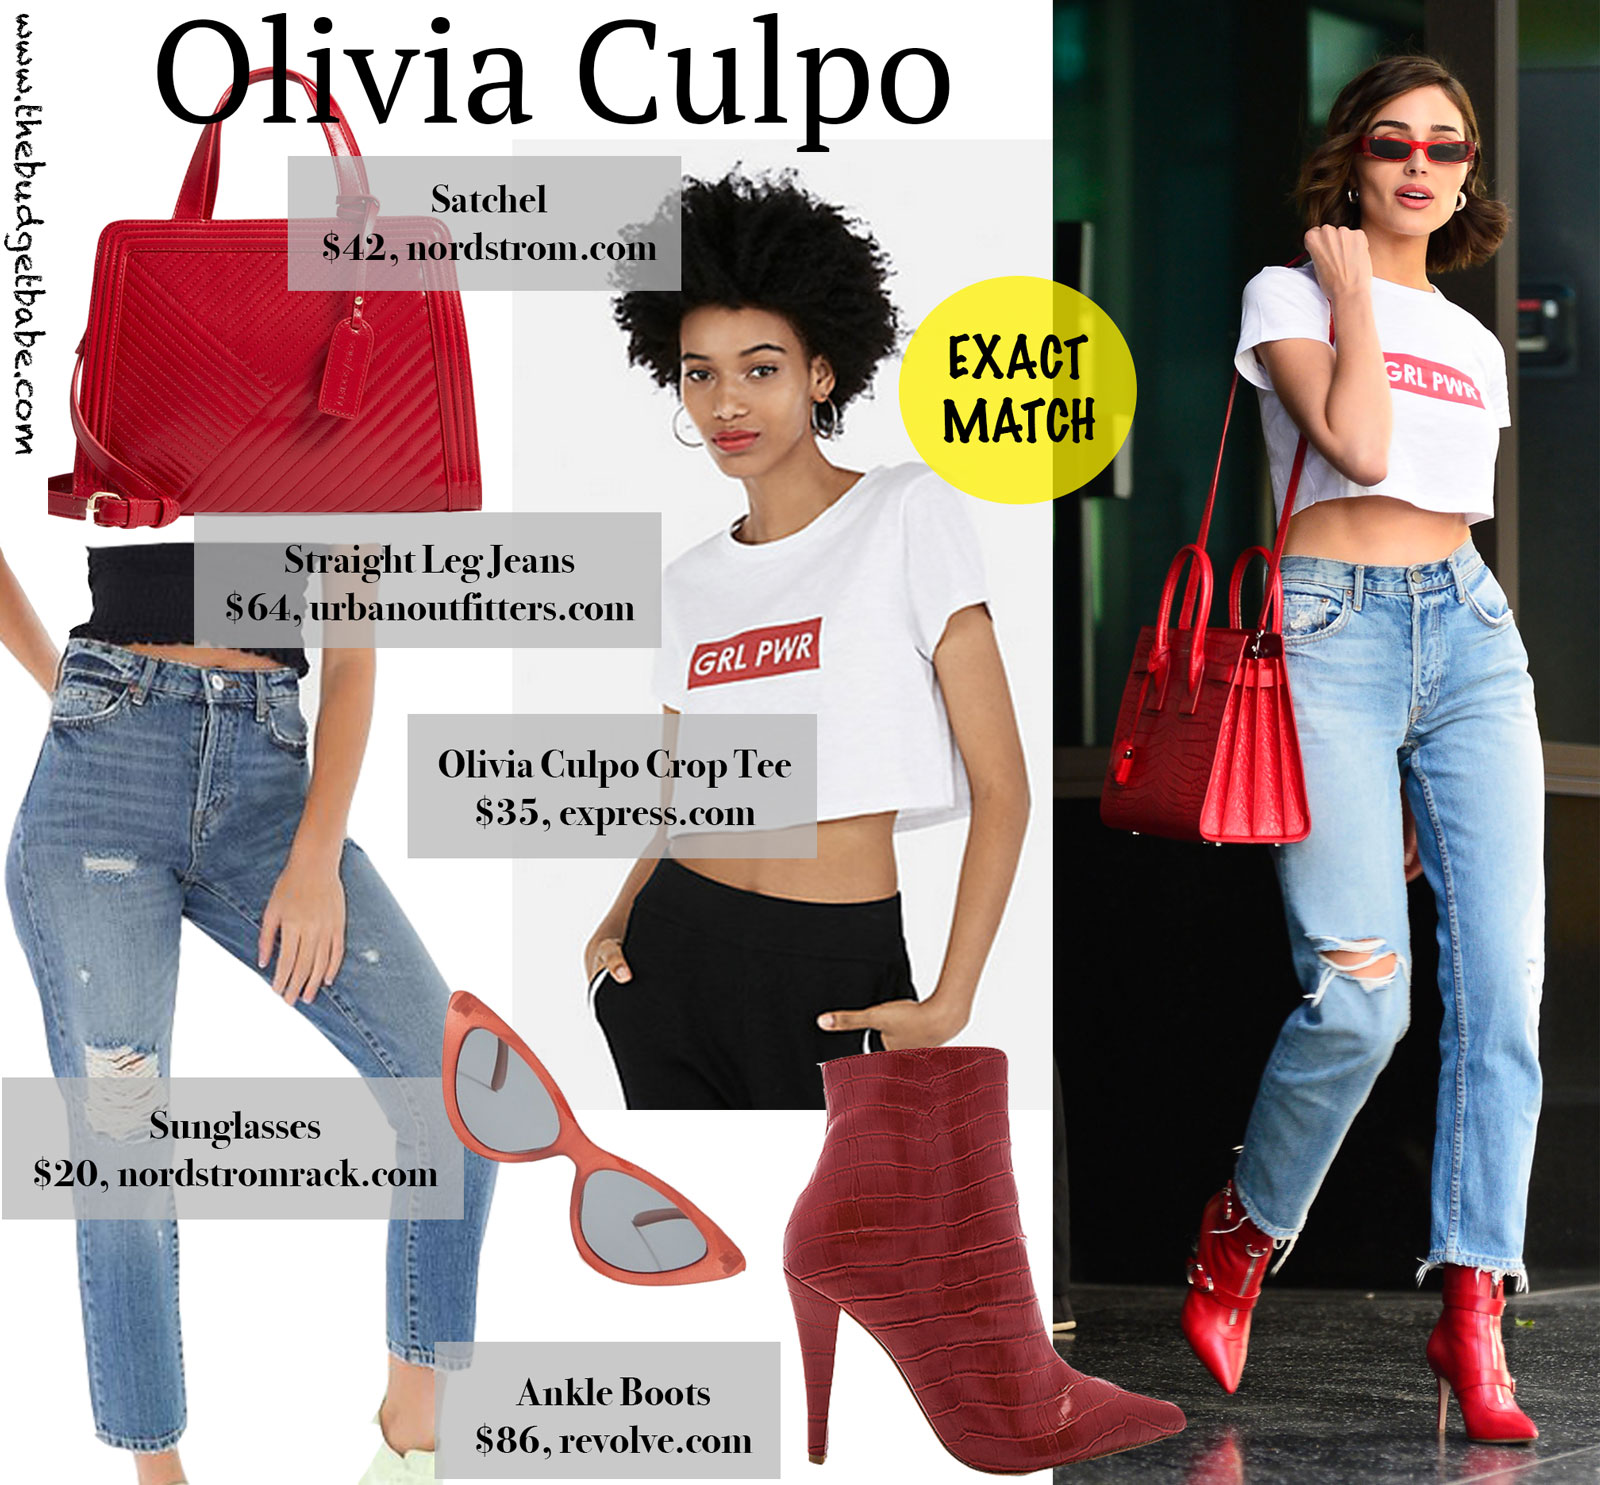 Olivia Culpo Grl Pwr Cropped Tee Look for Less